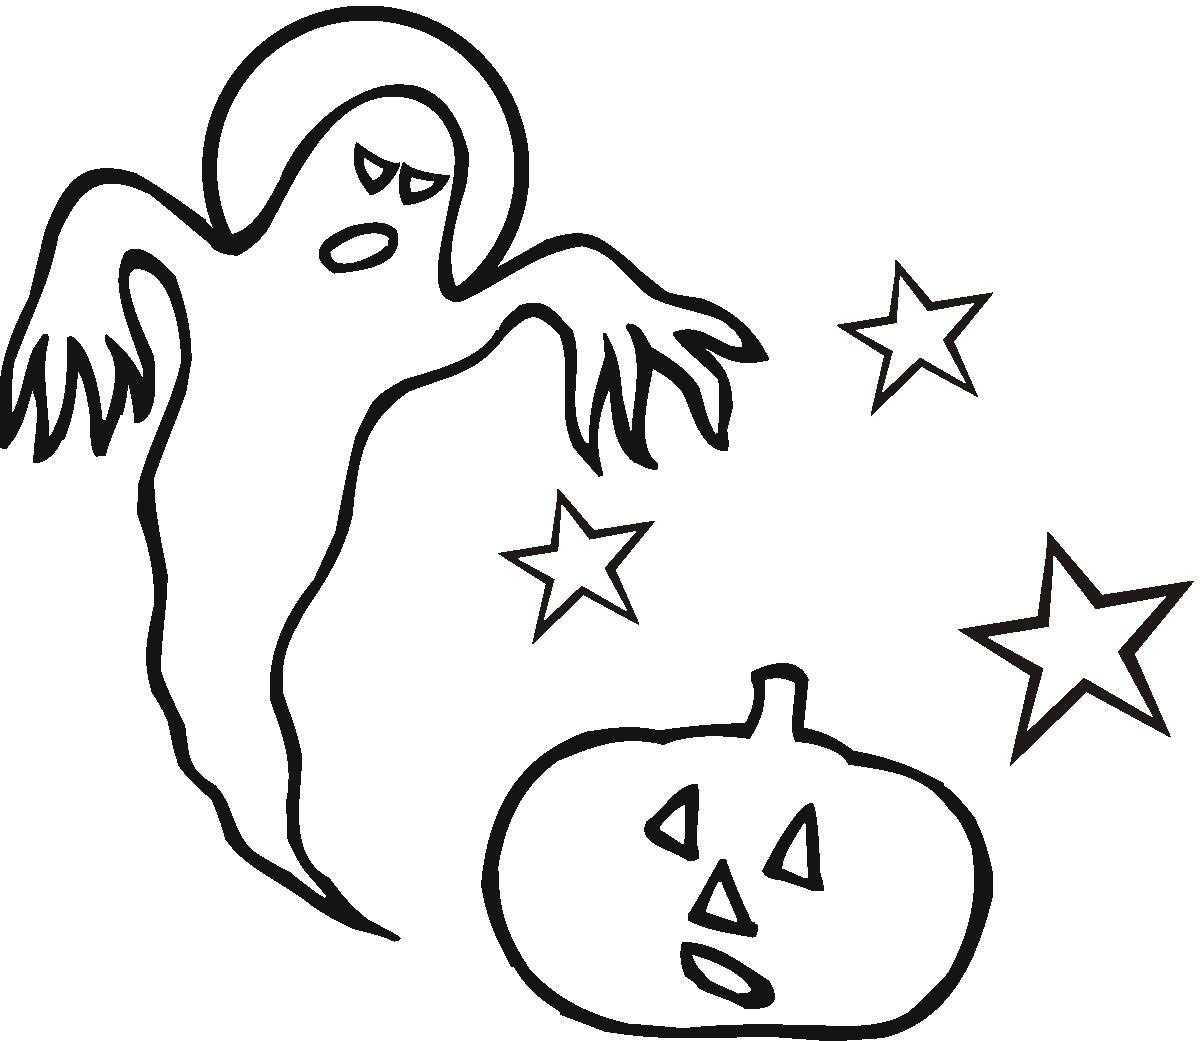 Coloring The Ghost and pumpkin on Halloween. Category Halloween. Tags:  pumpkin, Ghost.